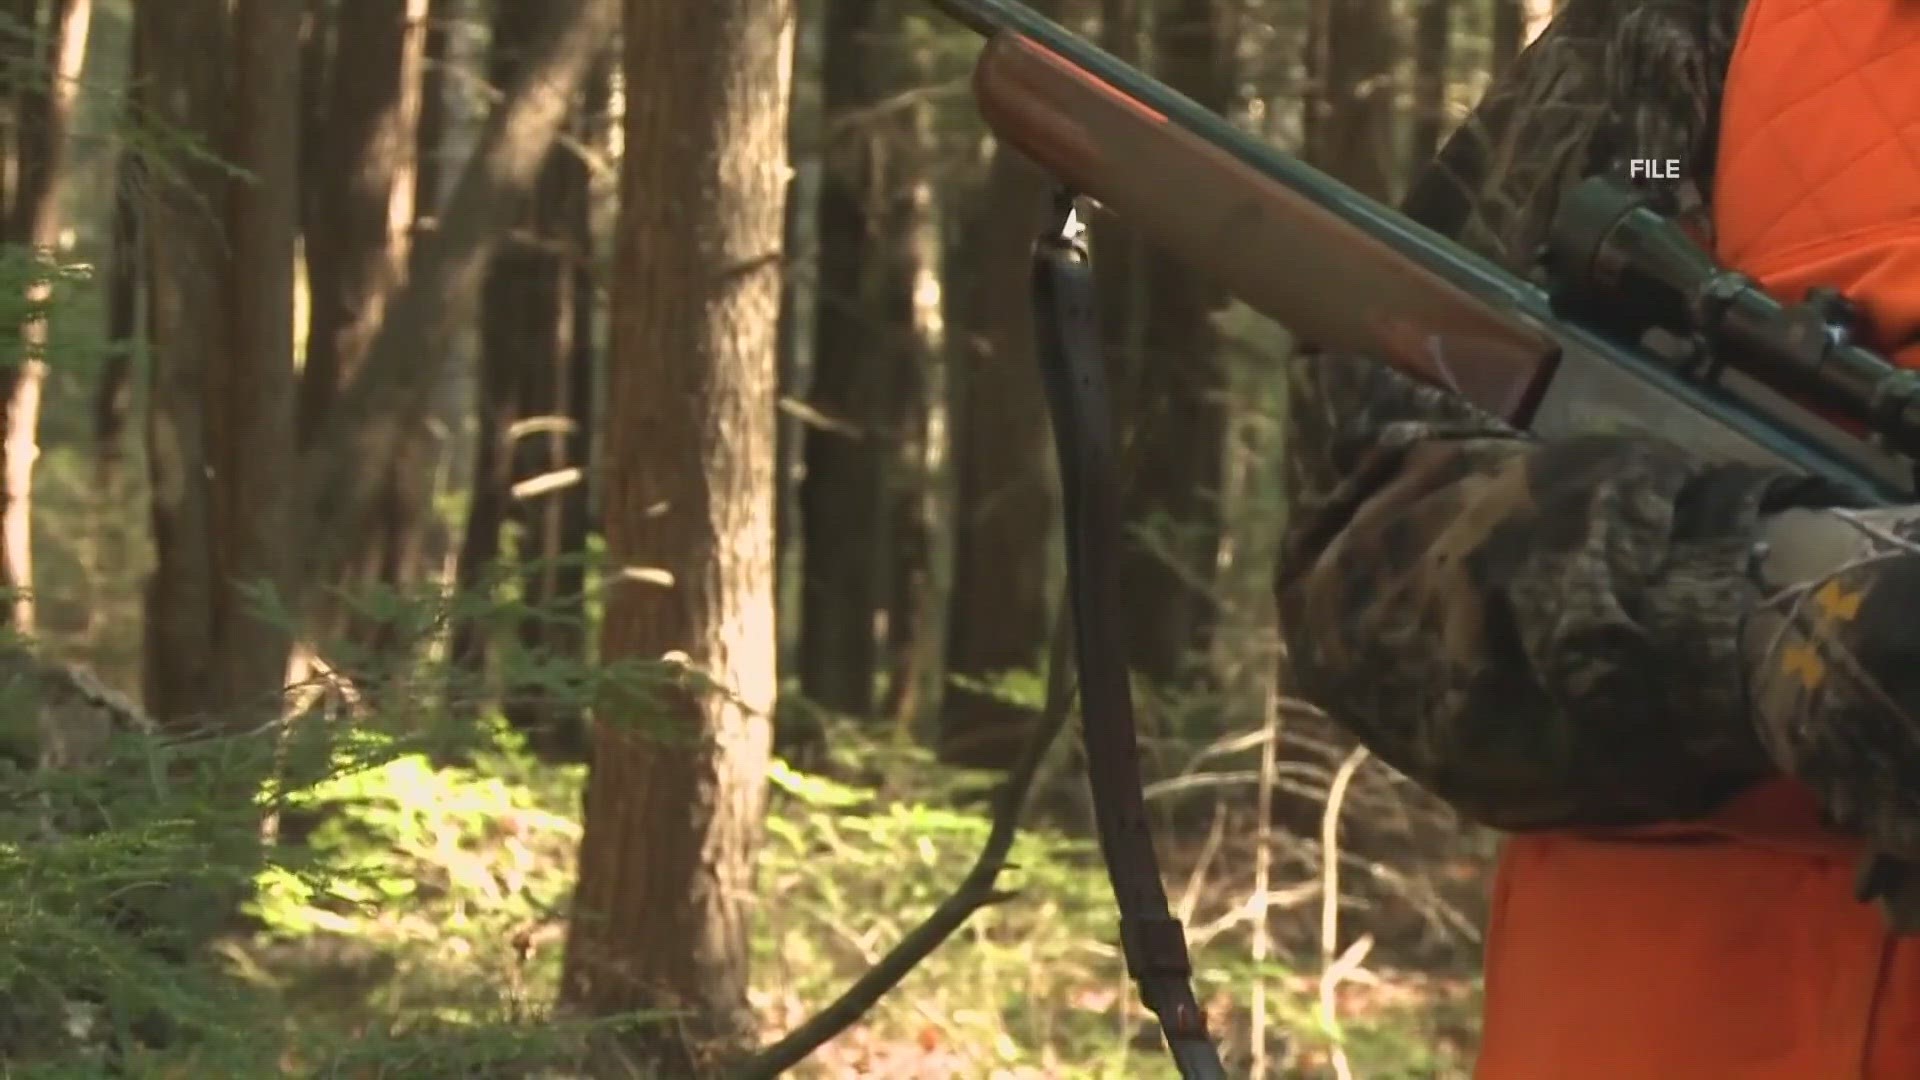 Those in favor of Sunday hunting say its protected under the newest amendment to the Maine constitution; opponents say it would rub landowners the wrong way.